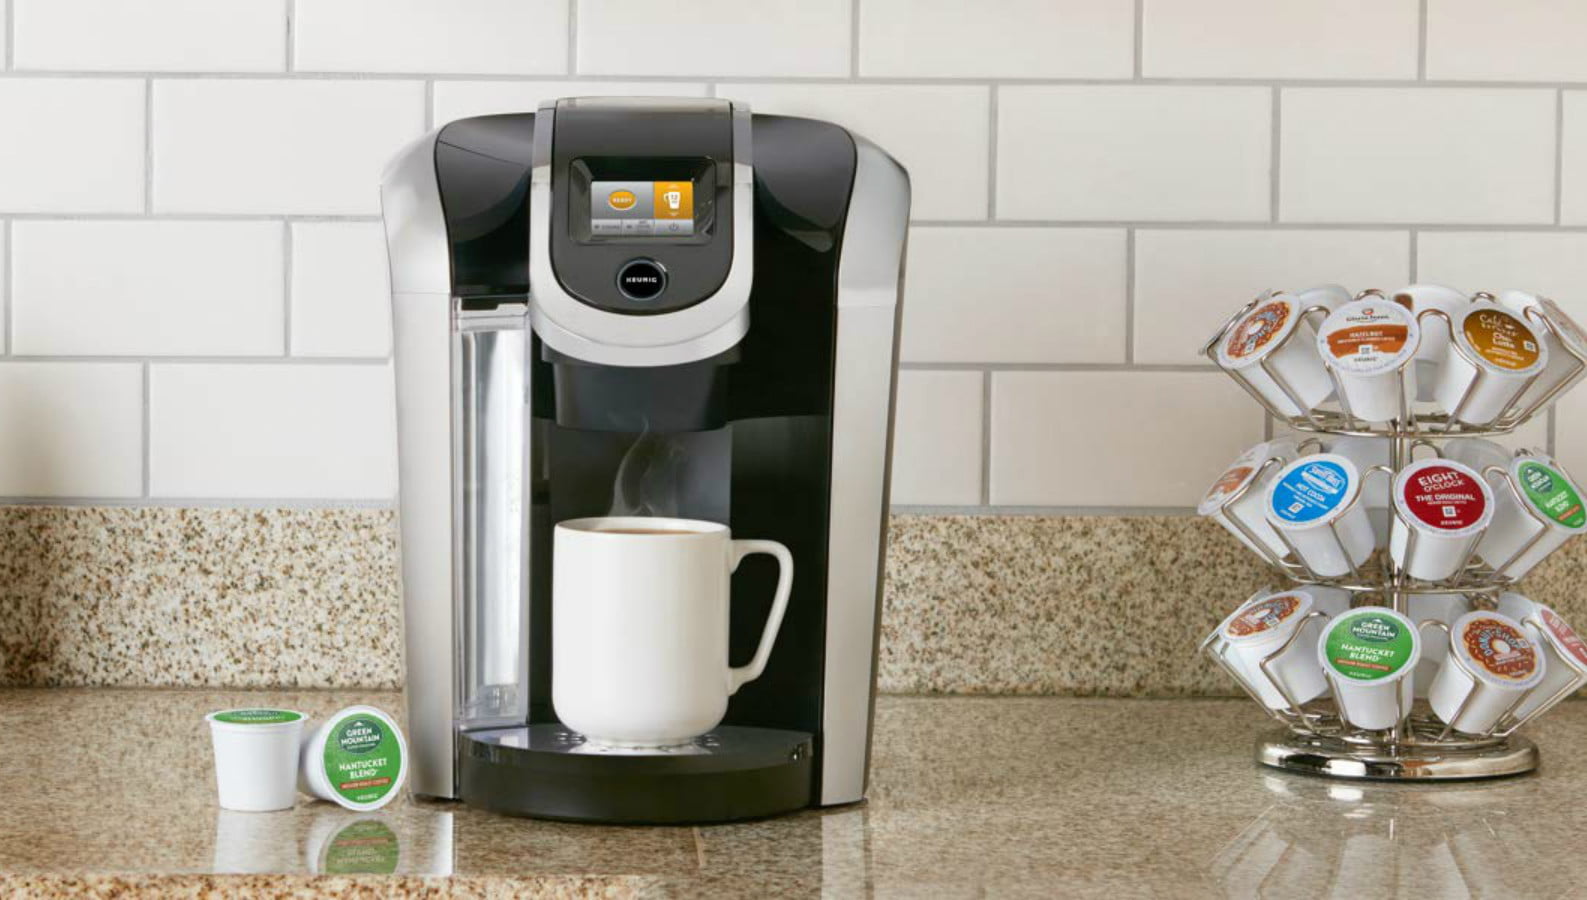 Get the best budget deals for Keurig in May 2021!